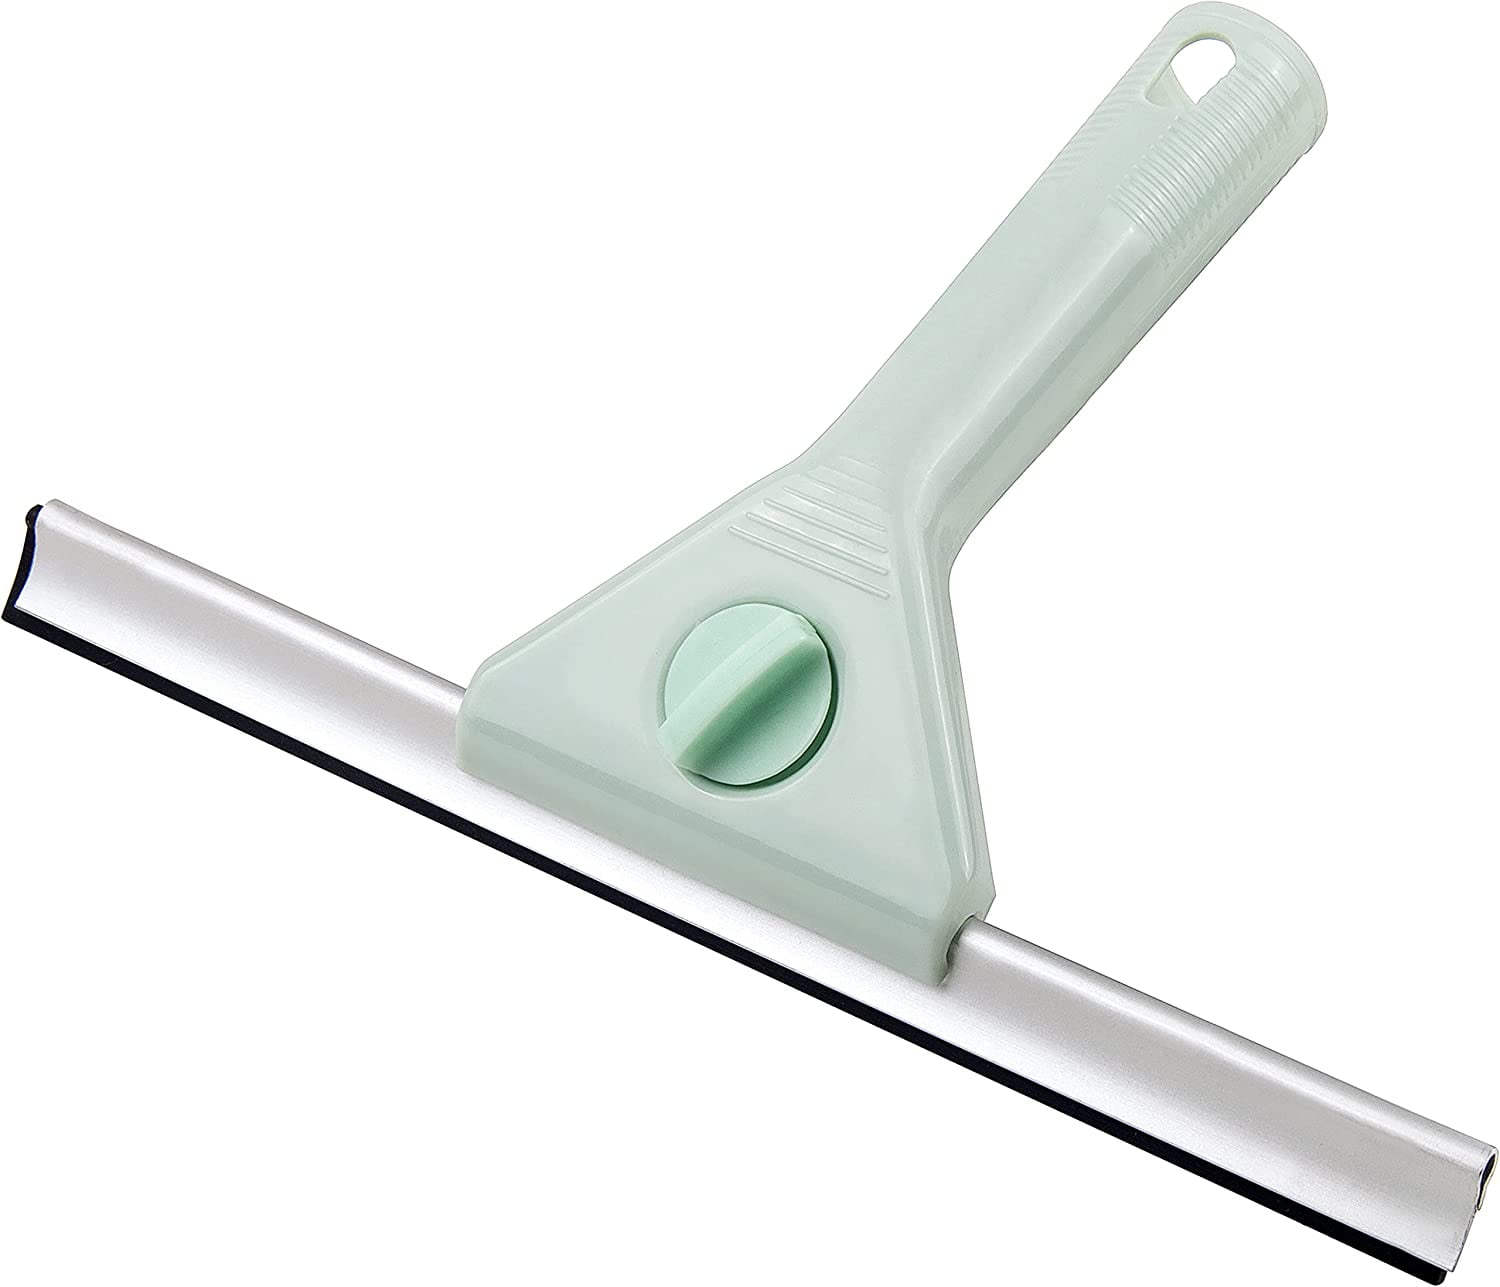 Spree Standard Professional All-Purpose Window Squeegee for Car